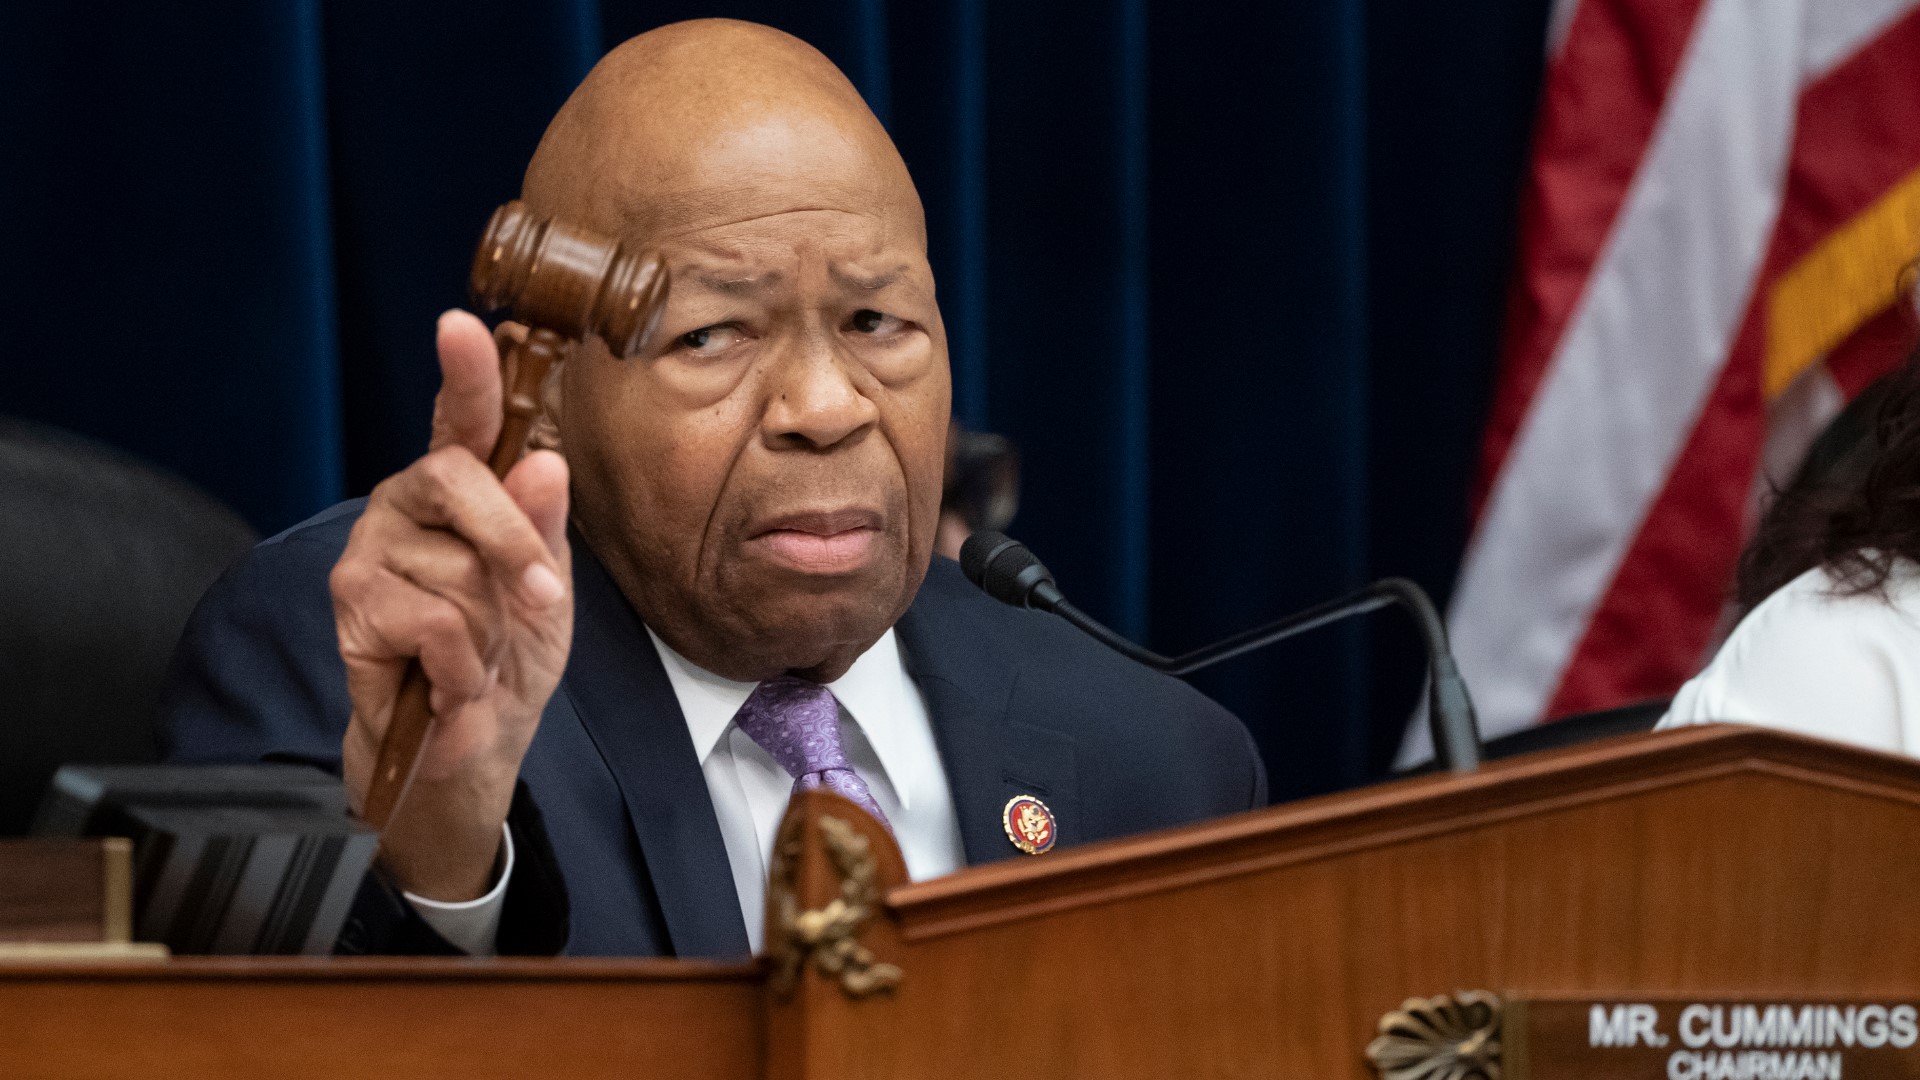 Trump lashed out in tweets against Rep. Cummings claiming his Baltimore-area district is "considered the worst run and most dangerous anywhere in the United States."